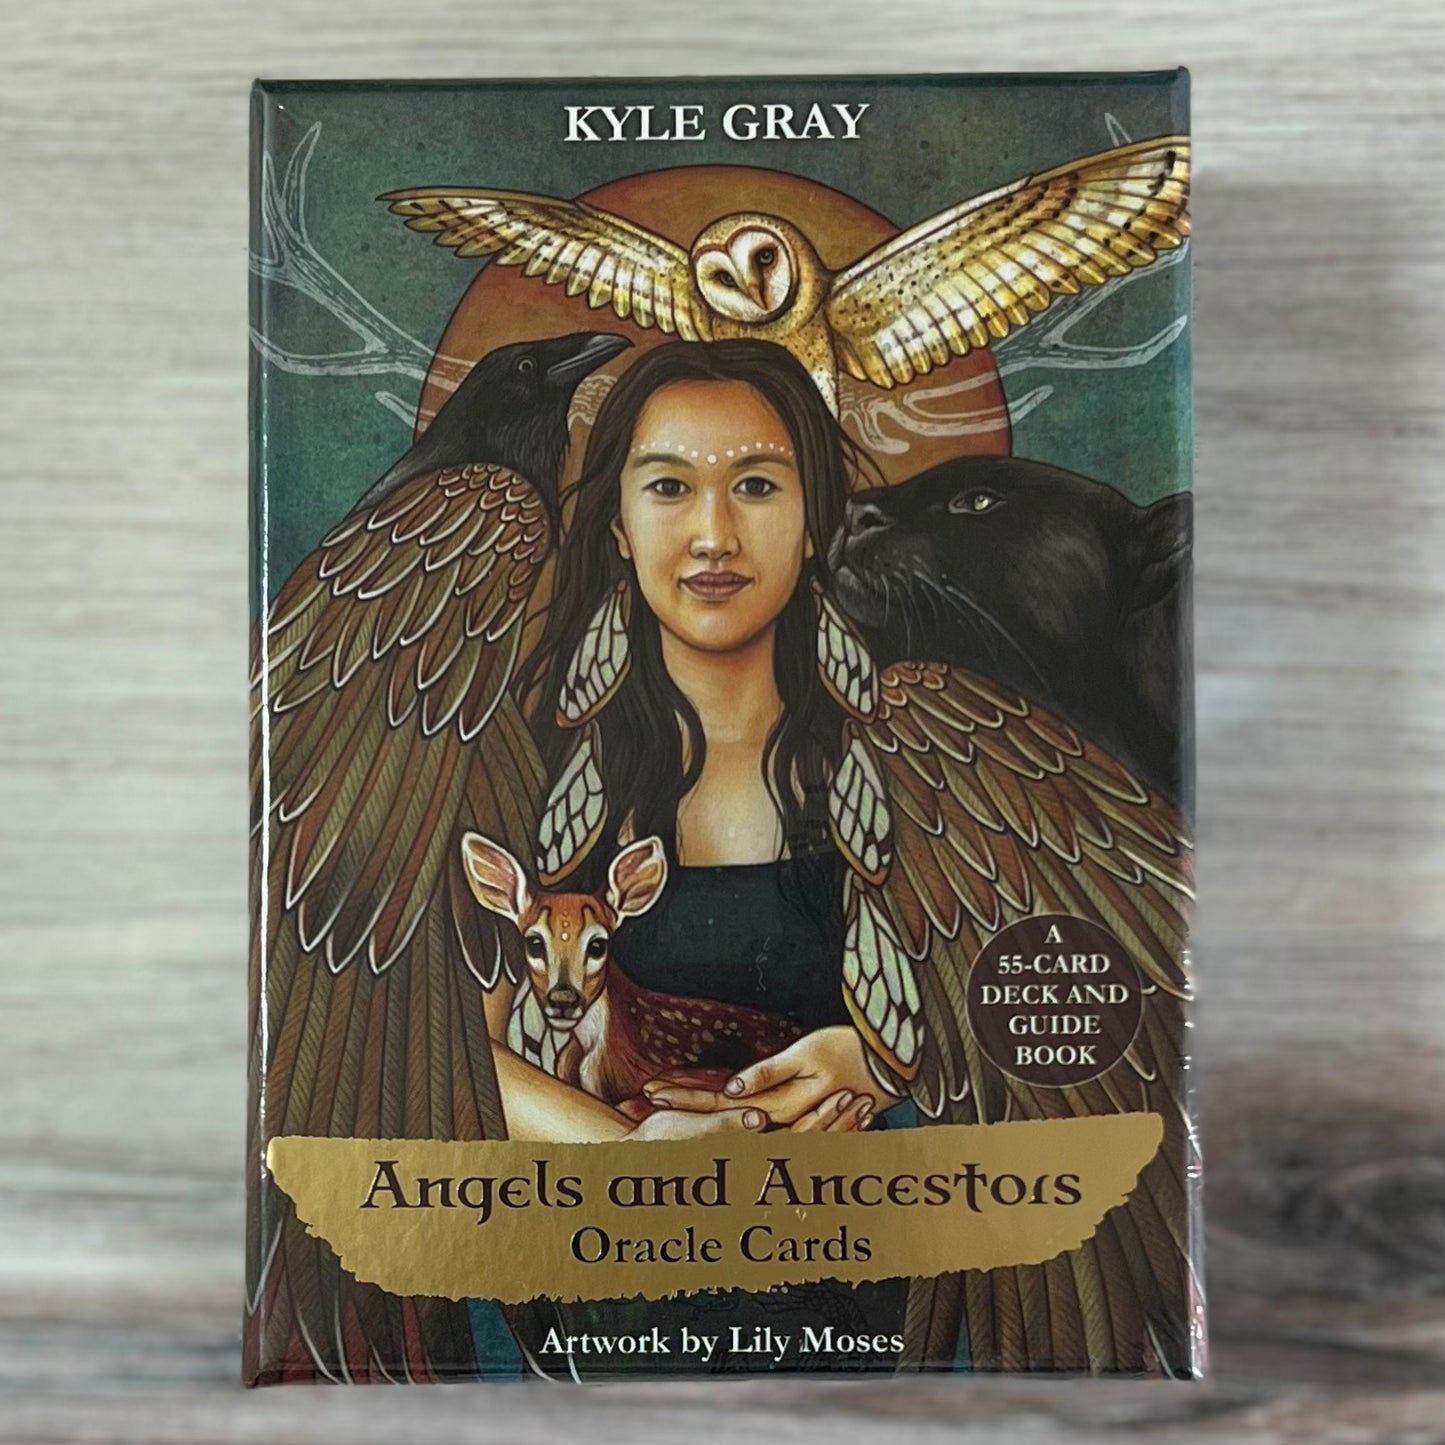 Angels and Ancestors Oracle by Kyle Gray